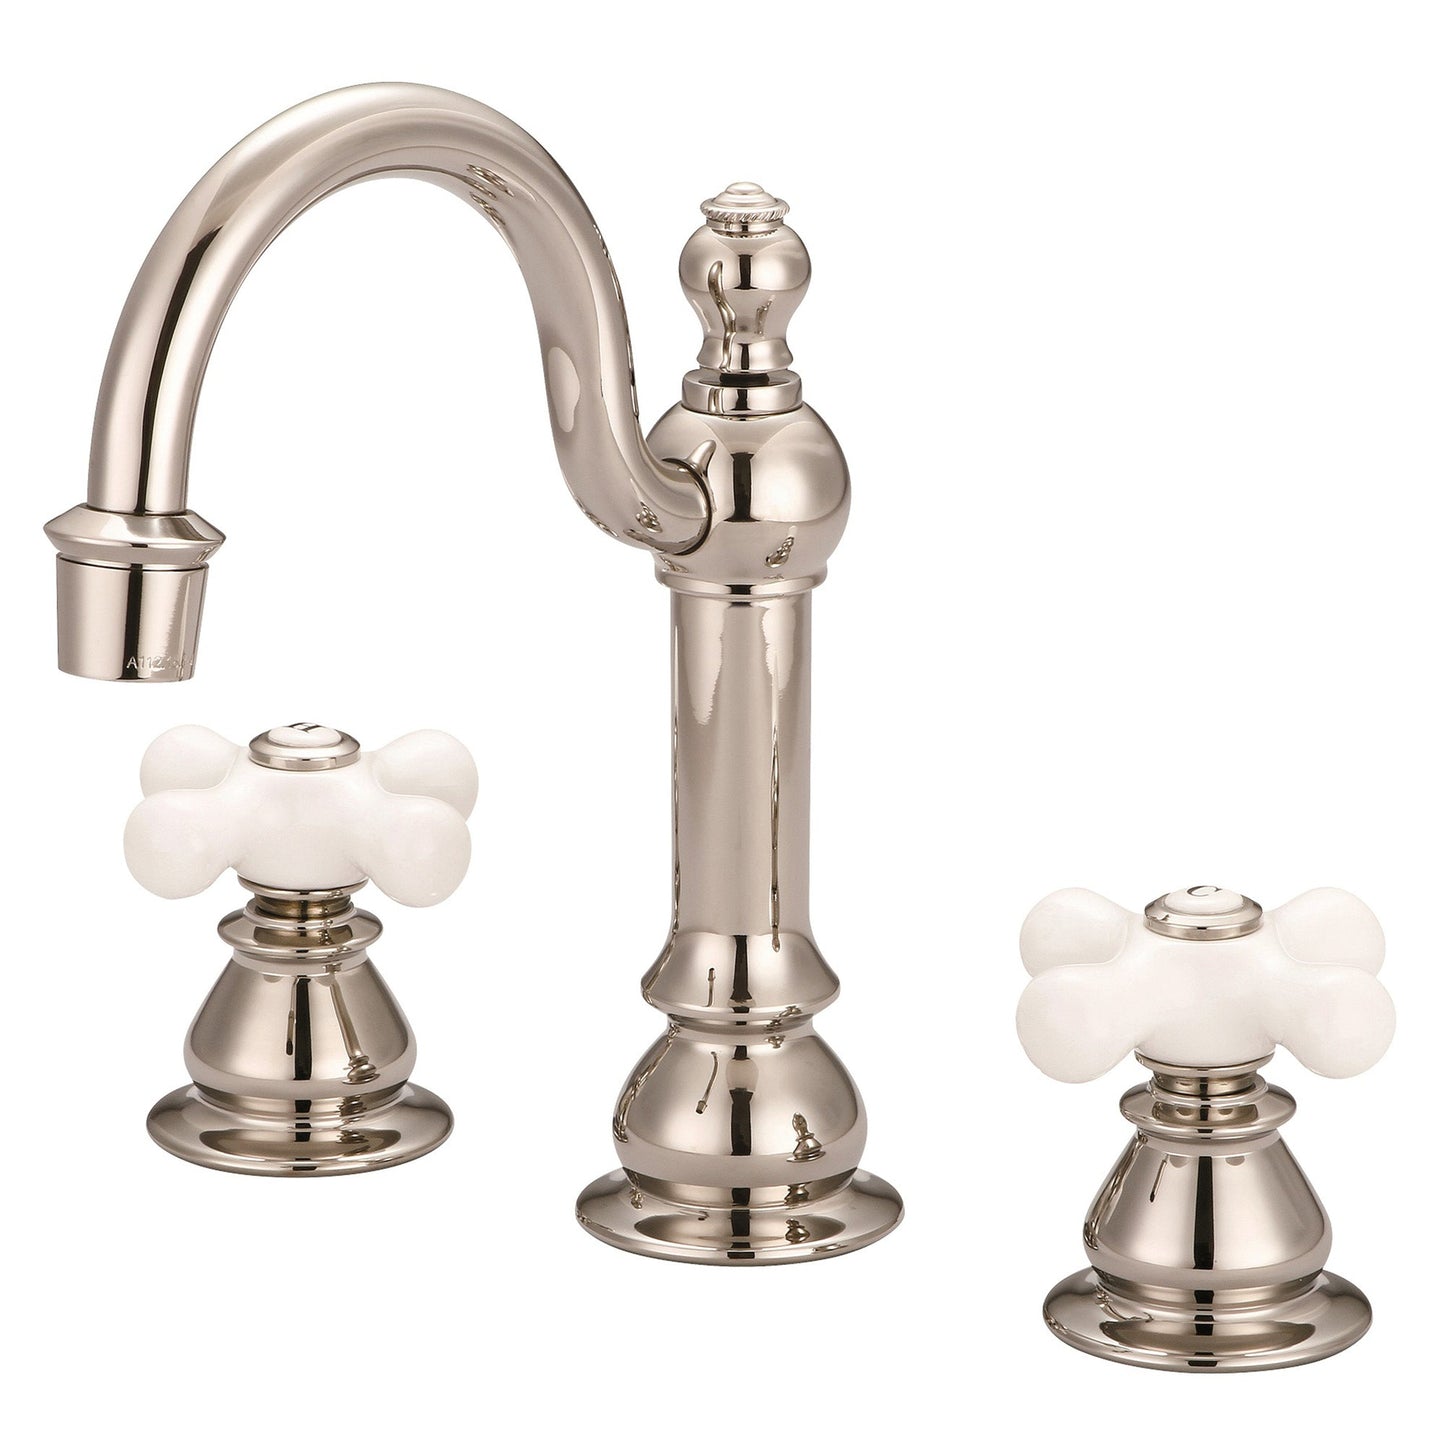 Water Creation American 20th Century Classic Widespread Lavatory F2-0012 8" Ivory Solid Brass Faucet With Pop-Up Drain And Porcelain Cross Handles, Hot And Cold Labels Included